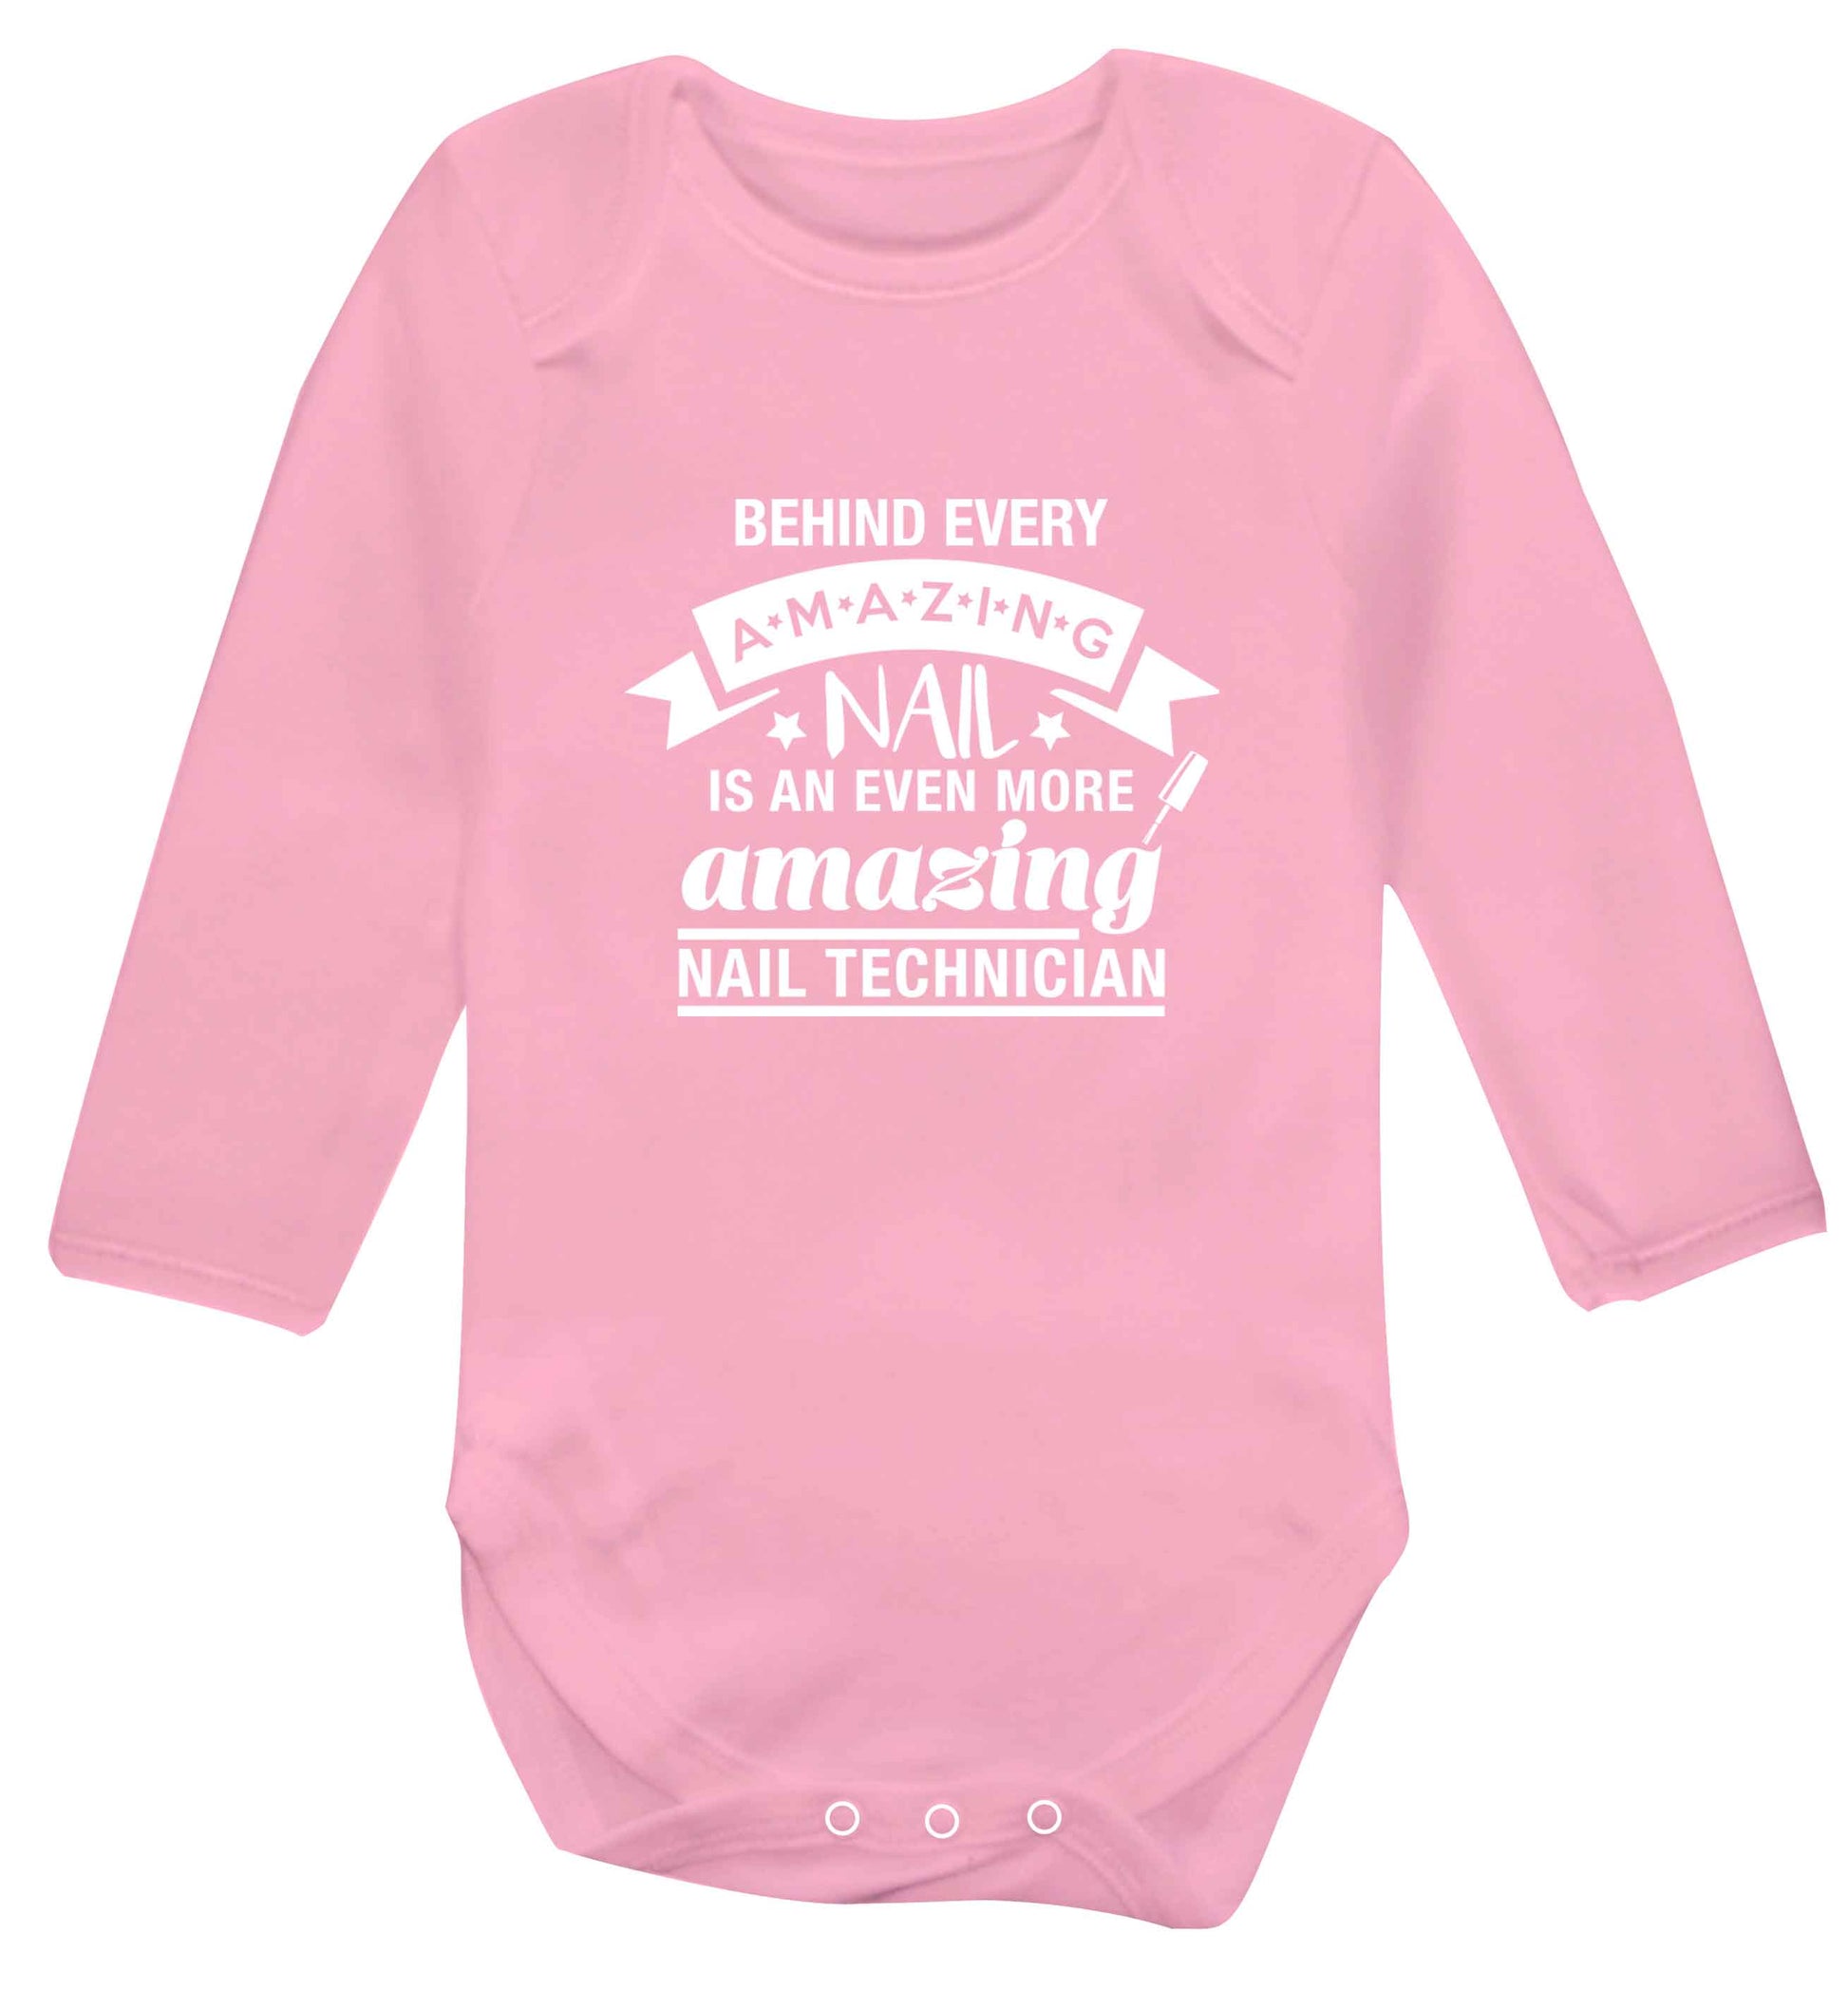 Behind every amazing nail is an even more amazing nail technician baby vest long sleeved pale pink 6-12 months